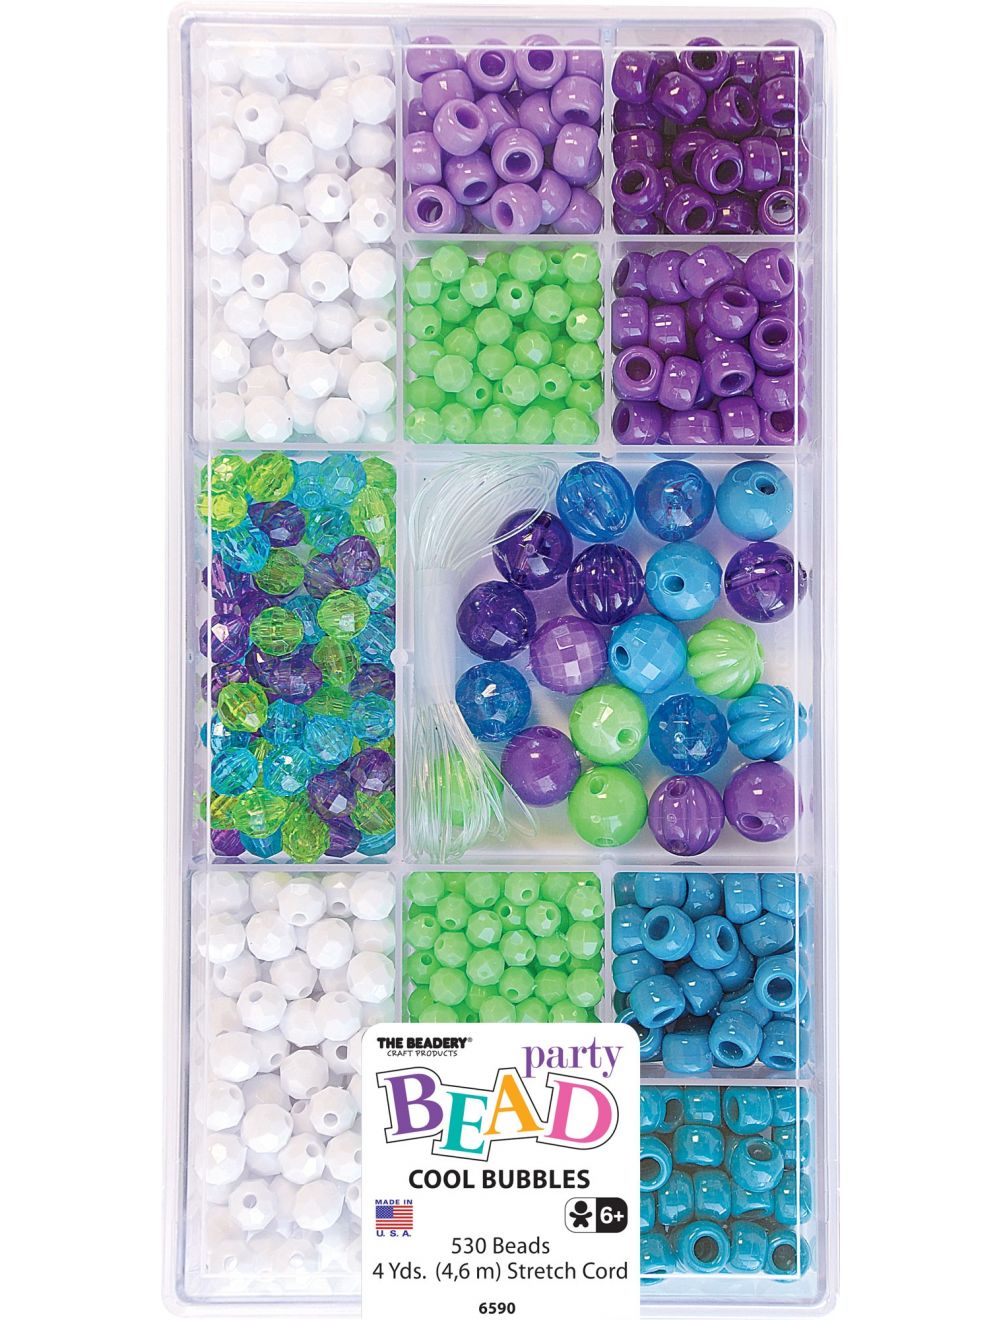 The Beadery 12 Compartment Bead Box-Cool Bubbles; 530 Beads